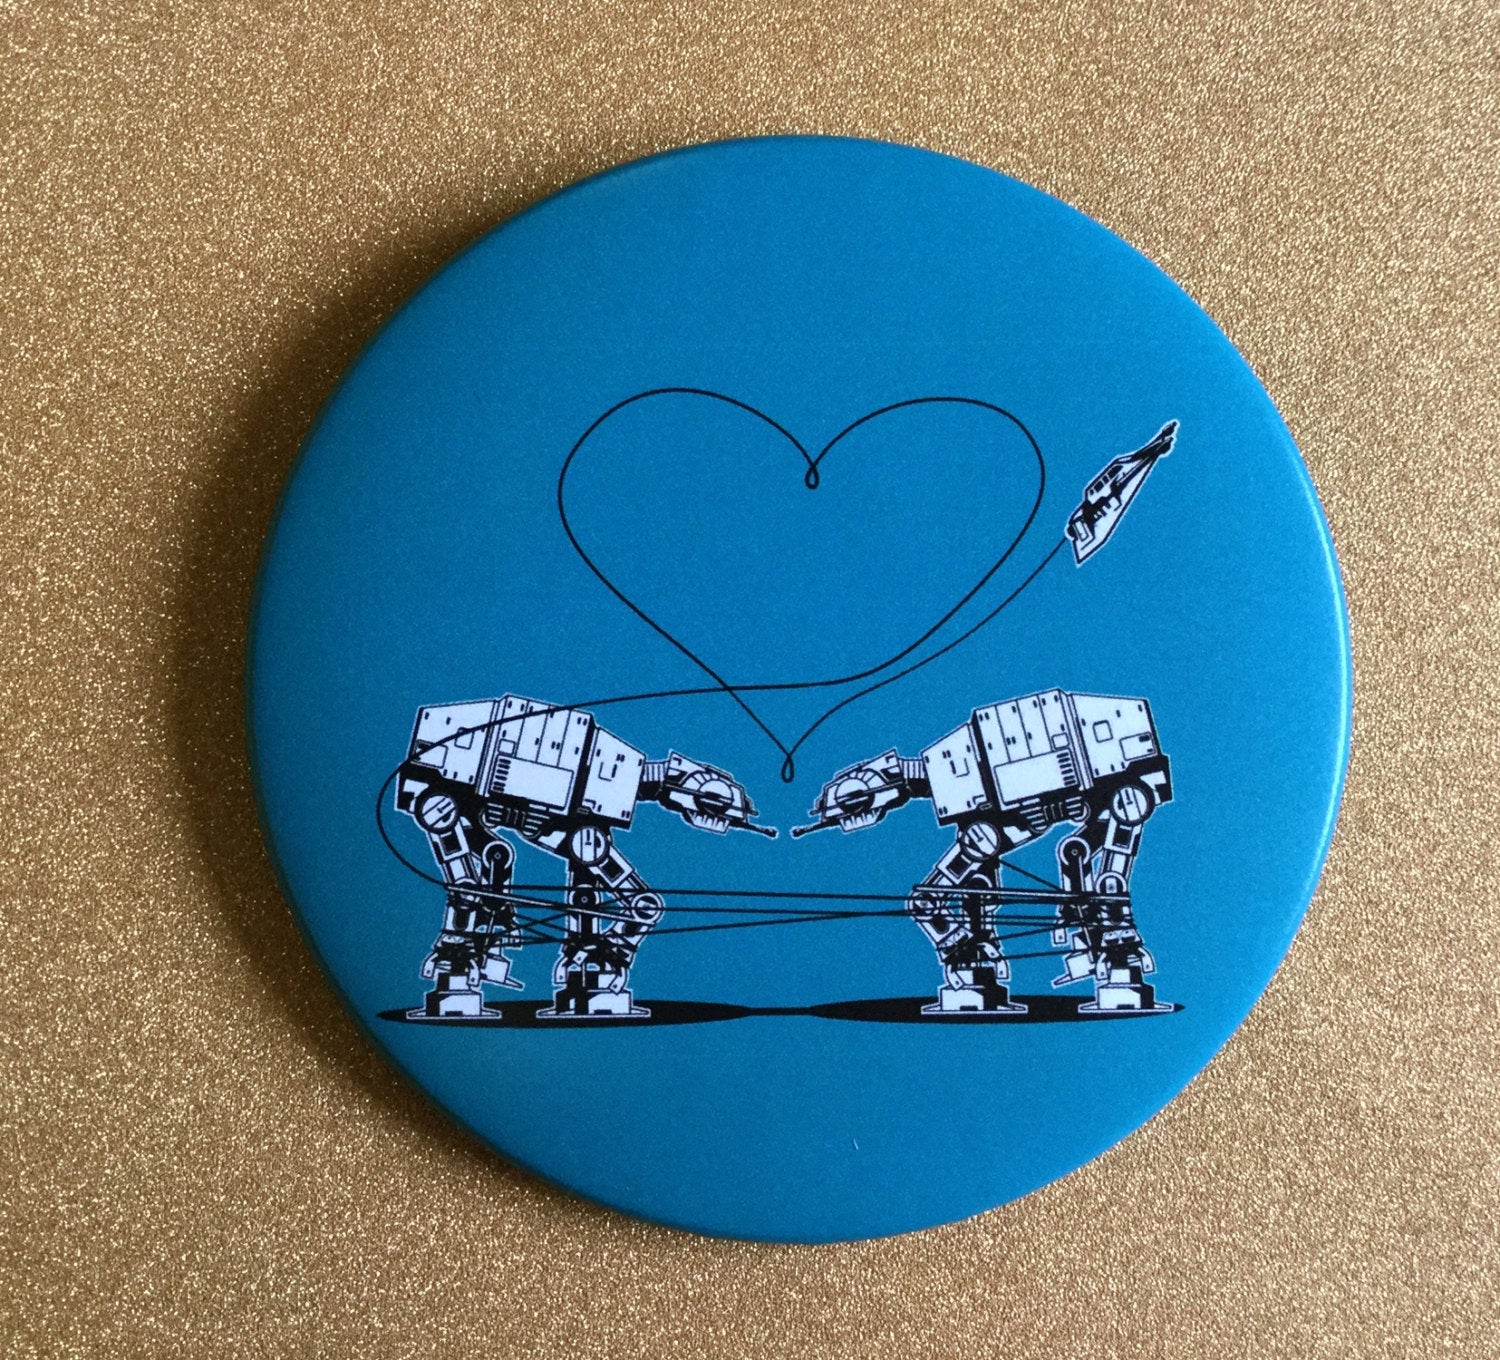 Mirror - 3.5 Inch: Love AT-AT First Sight - Blue